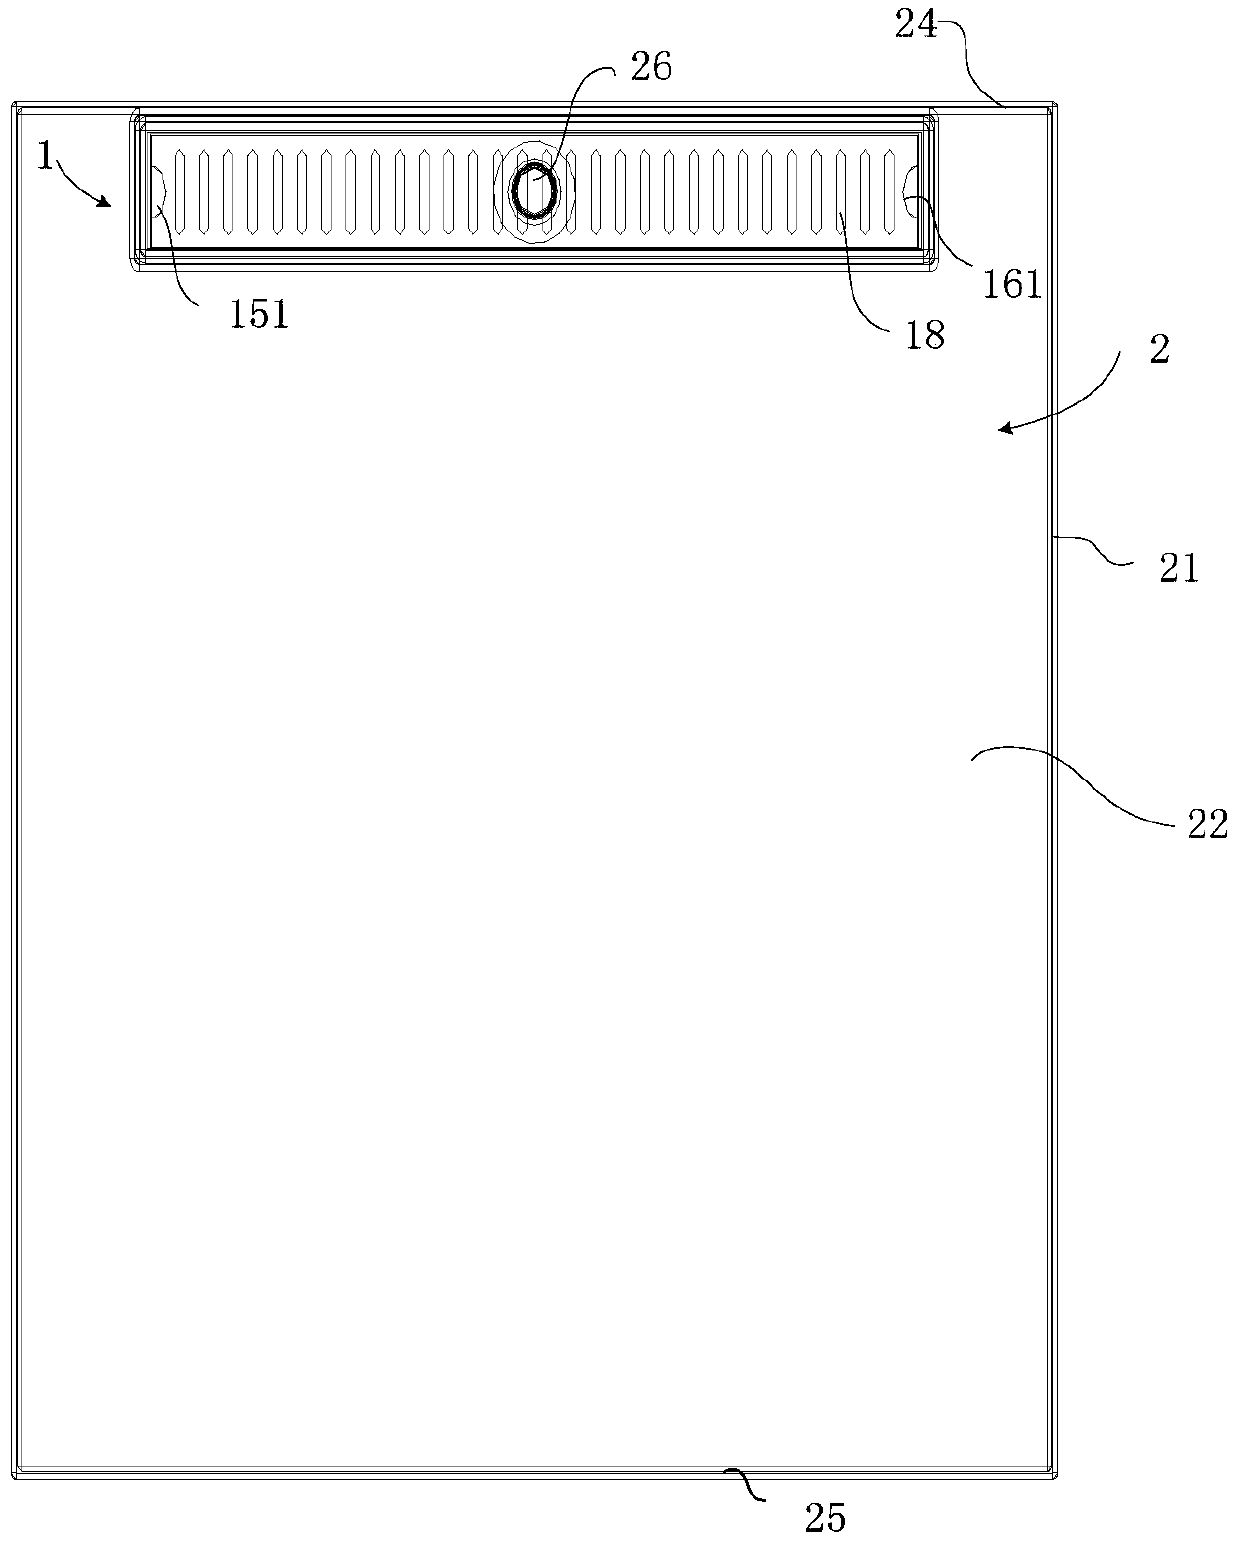 Toilet floor drain assembly and mounting method